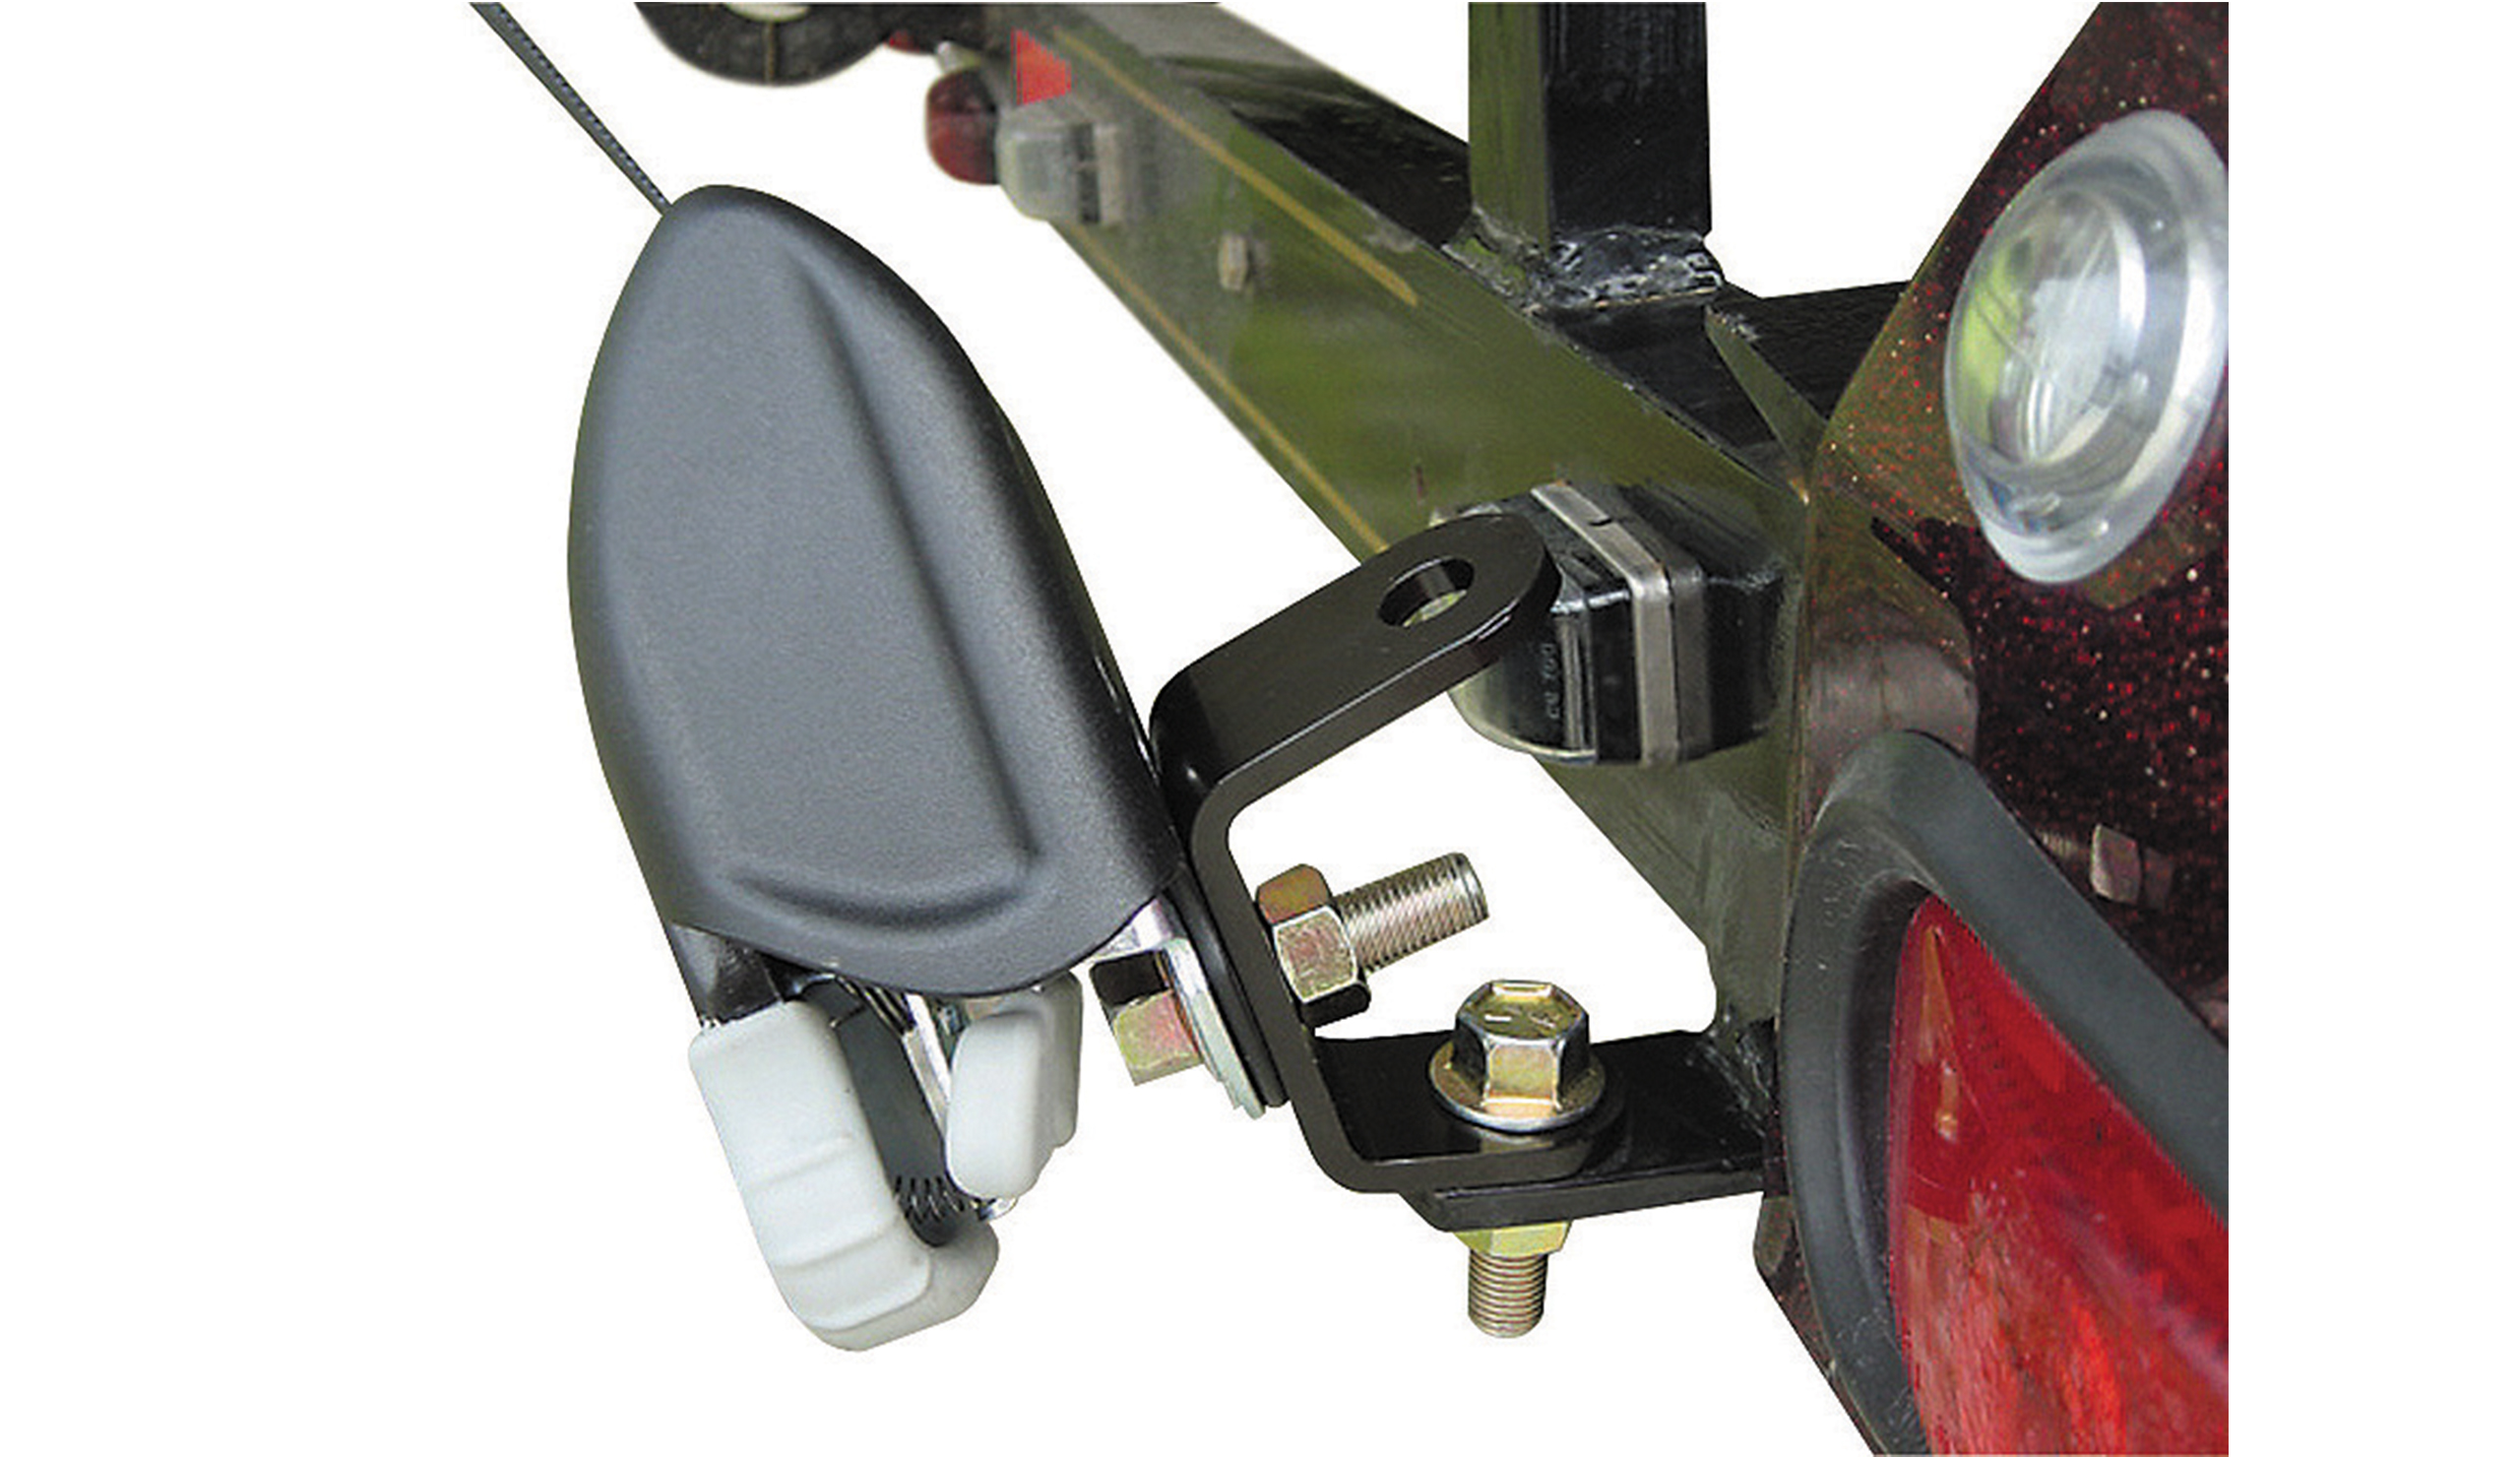 BoatBuckle retractable tie down & mounting bracket kit